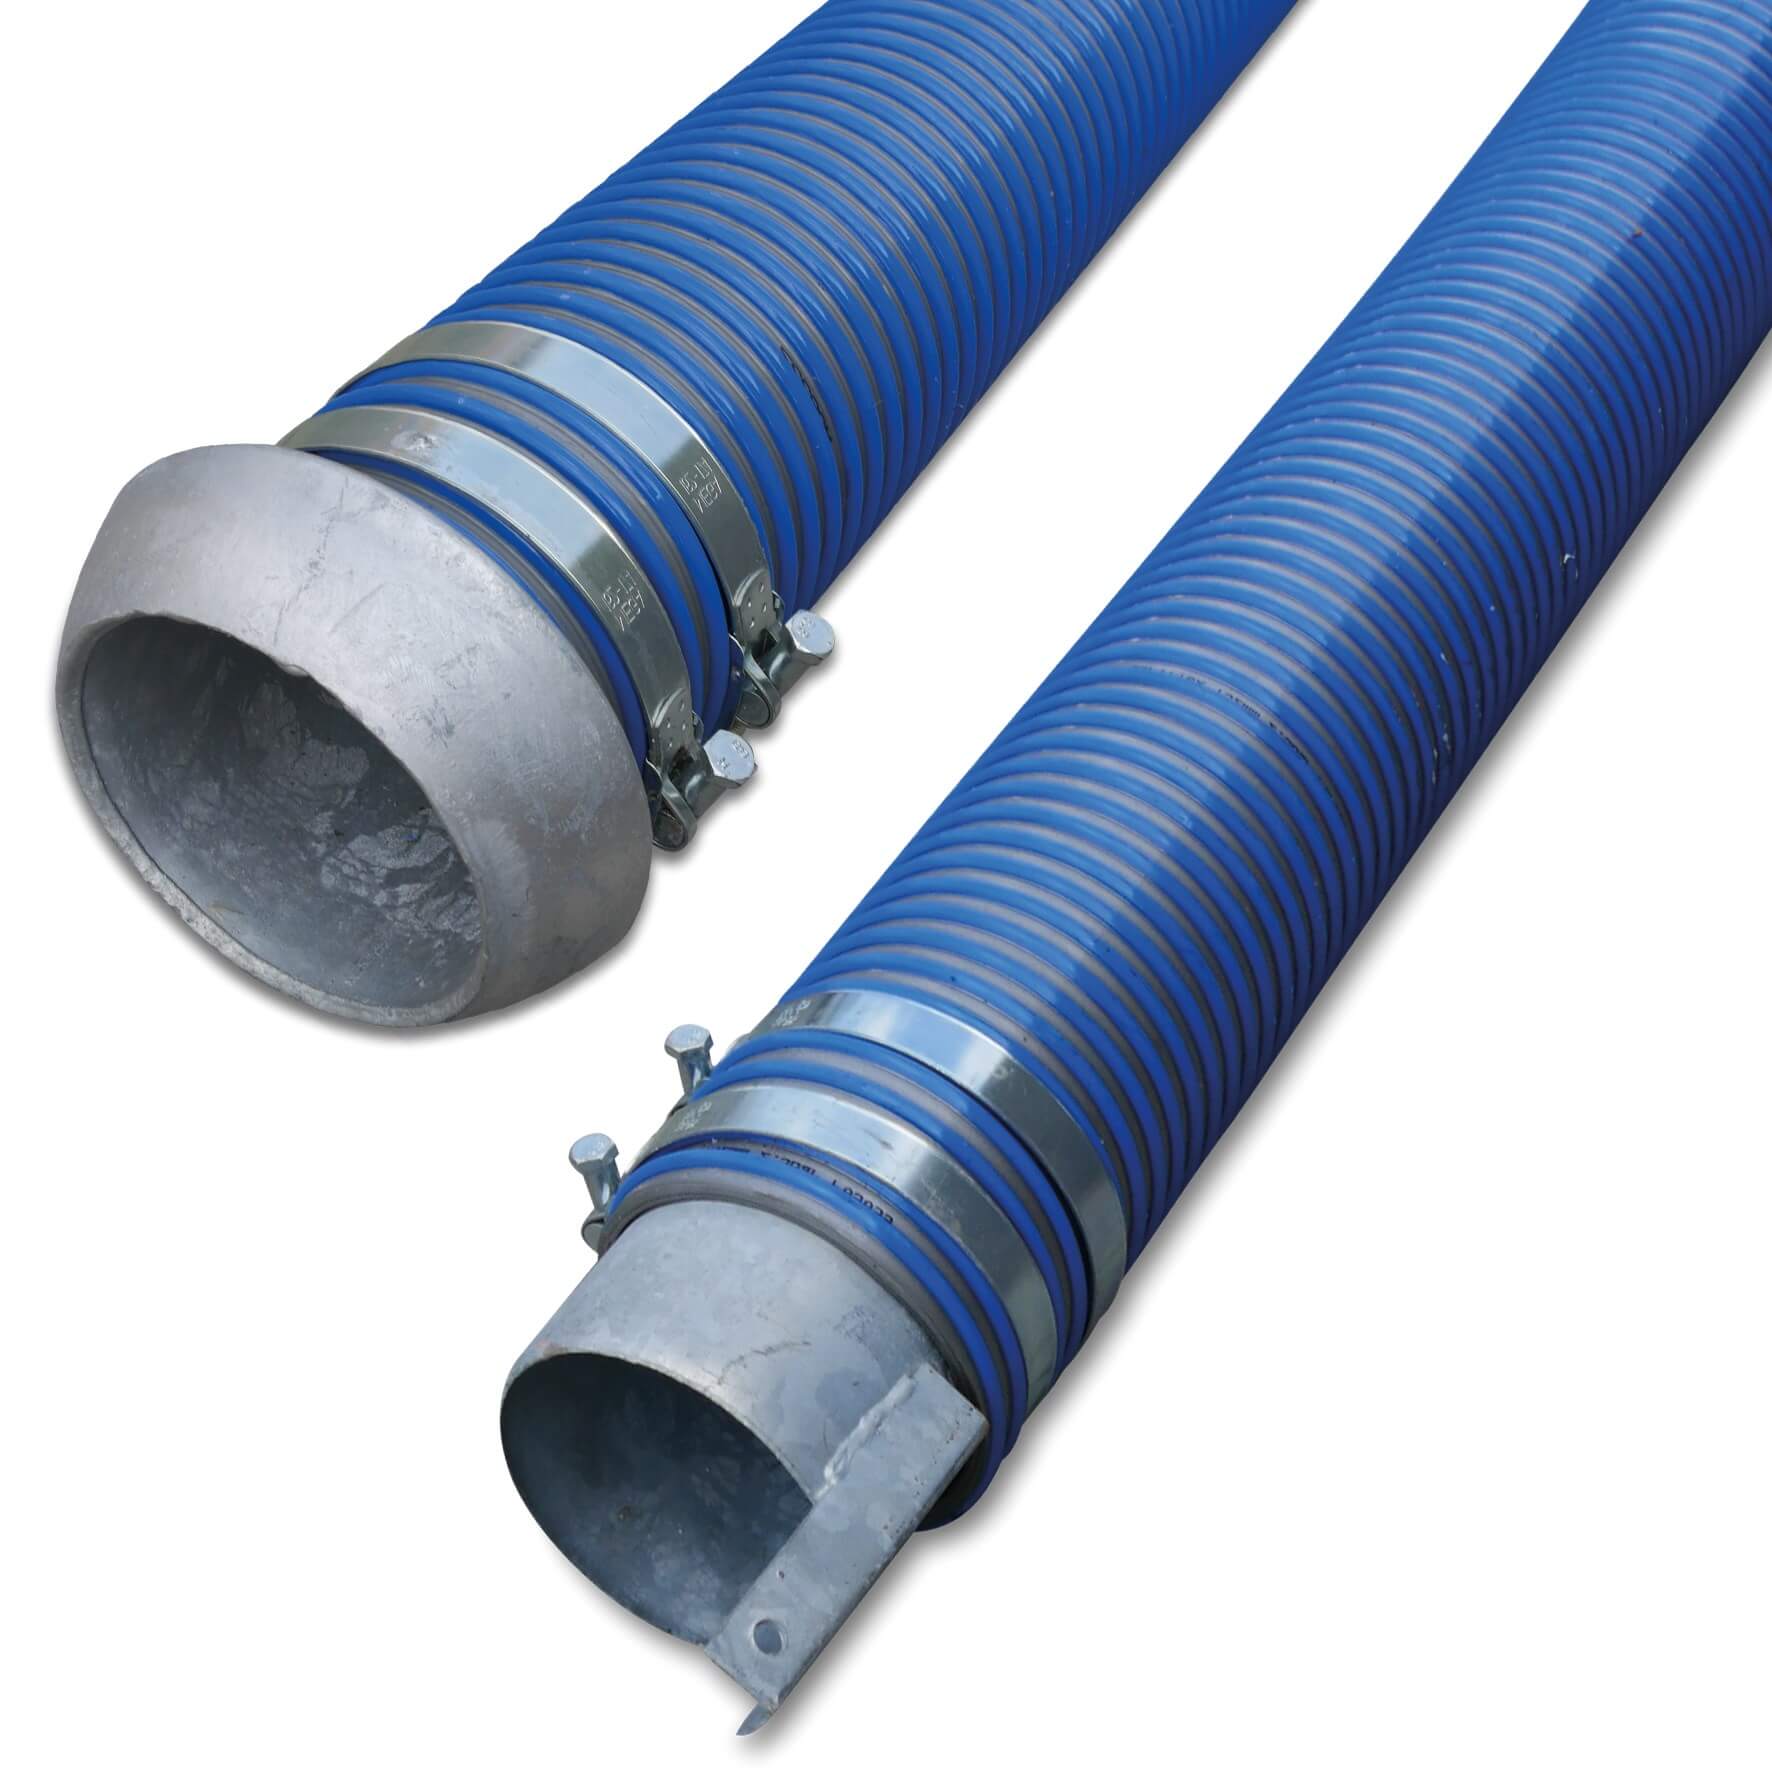 Spiral suction hose PVC 152 mm male part Perrot x end piece with eye 2bar blue/grey 4m type Agriflex